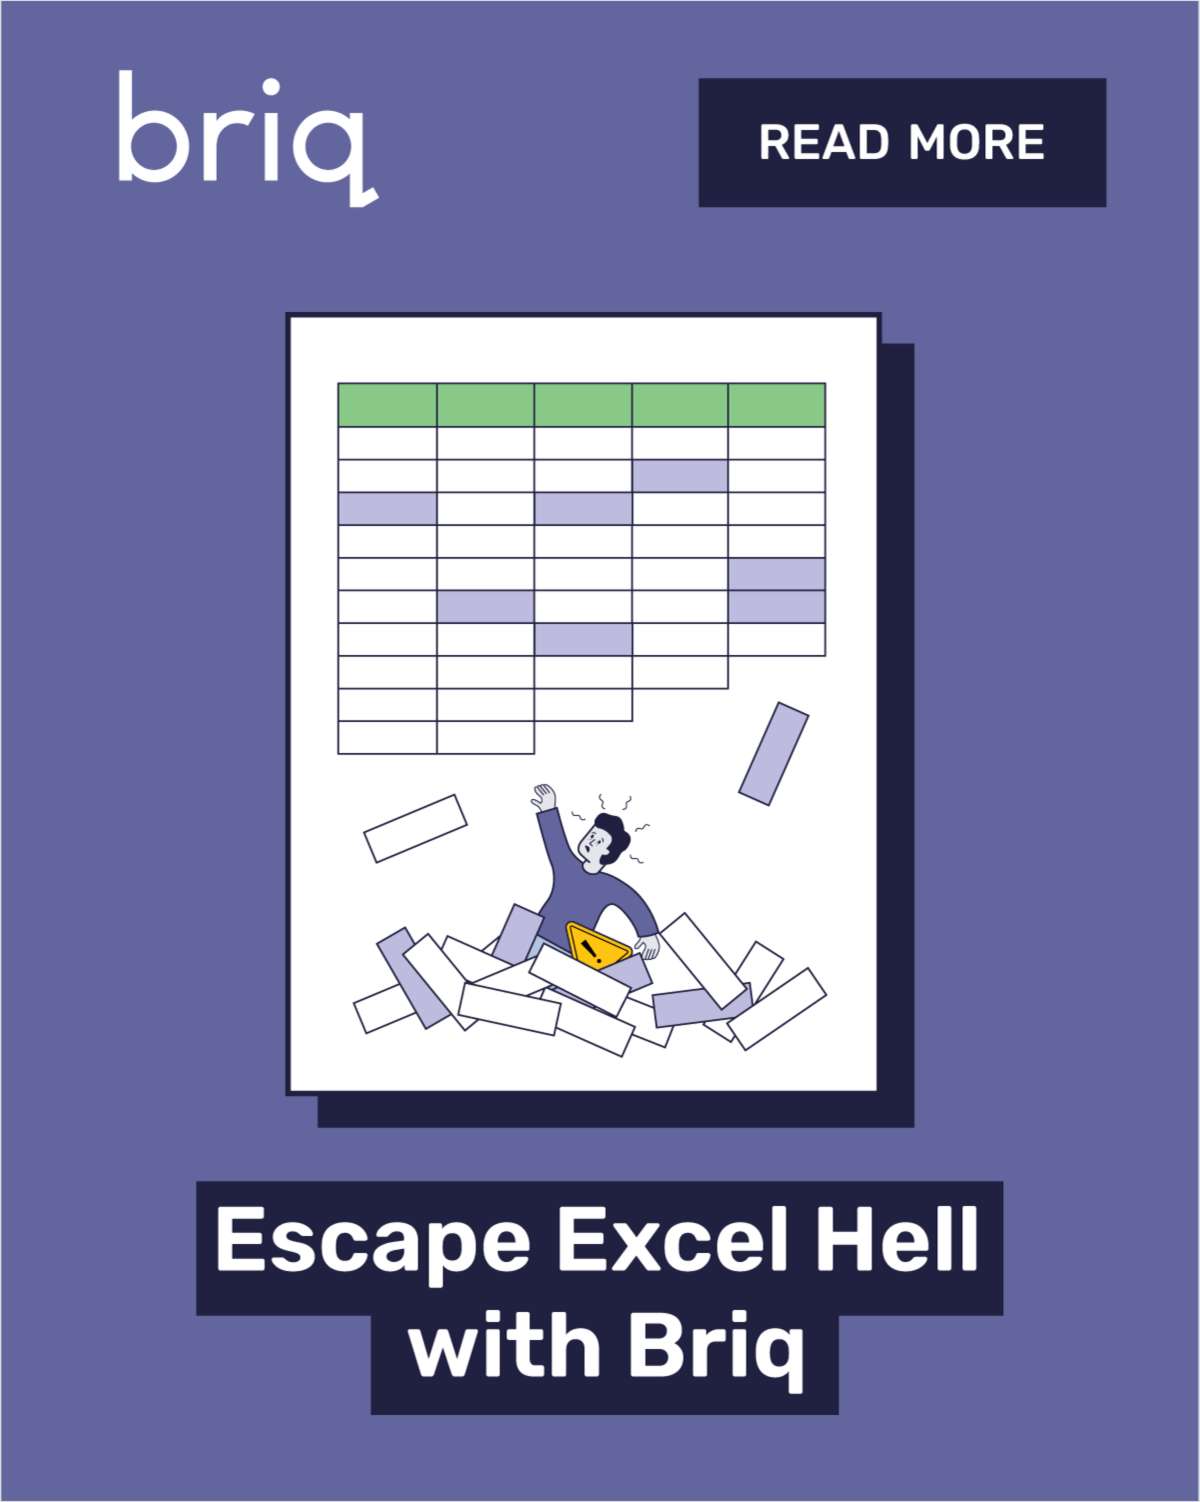 Escape from the EXCEL HELL in Construction!